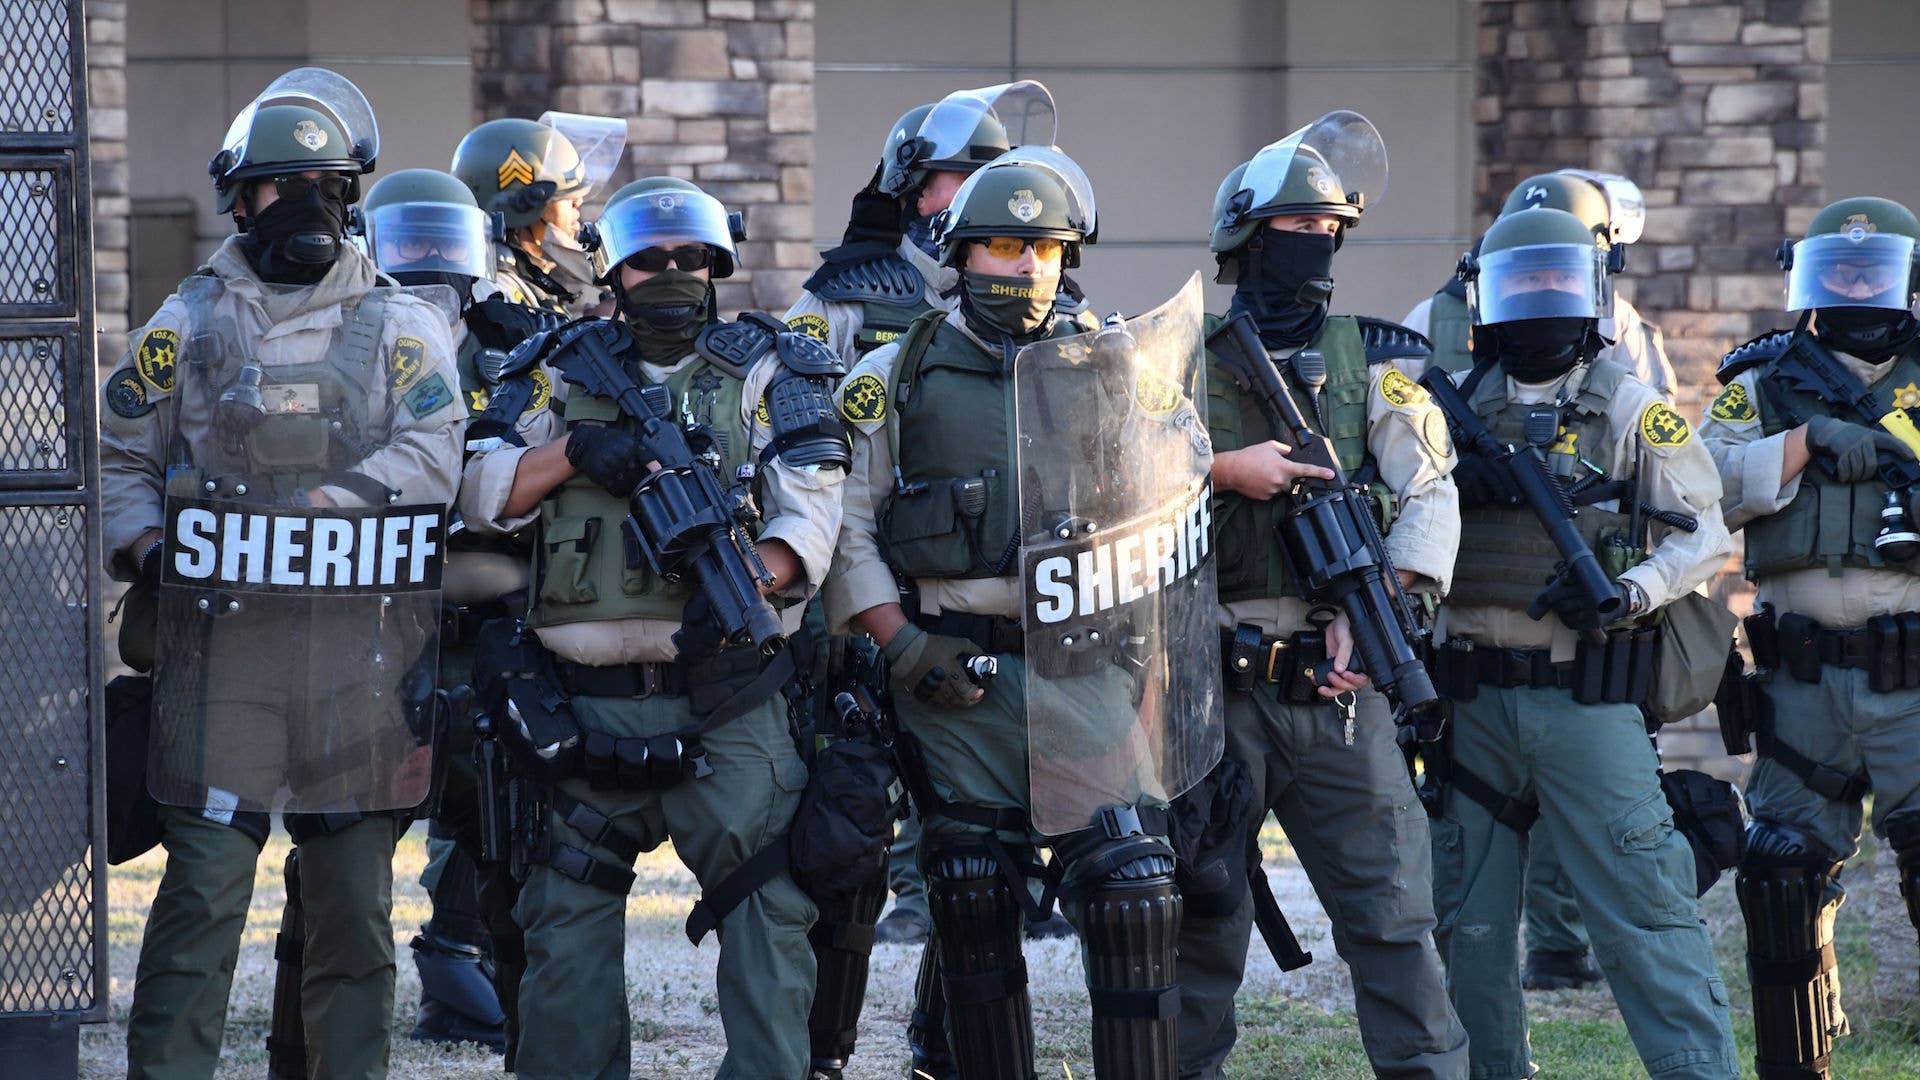 Sheriff's in riot gear stand in front of the South L.A. Sheriff's Station